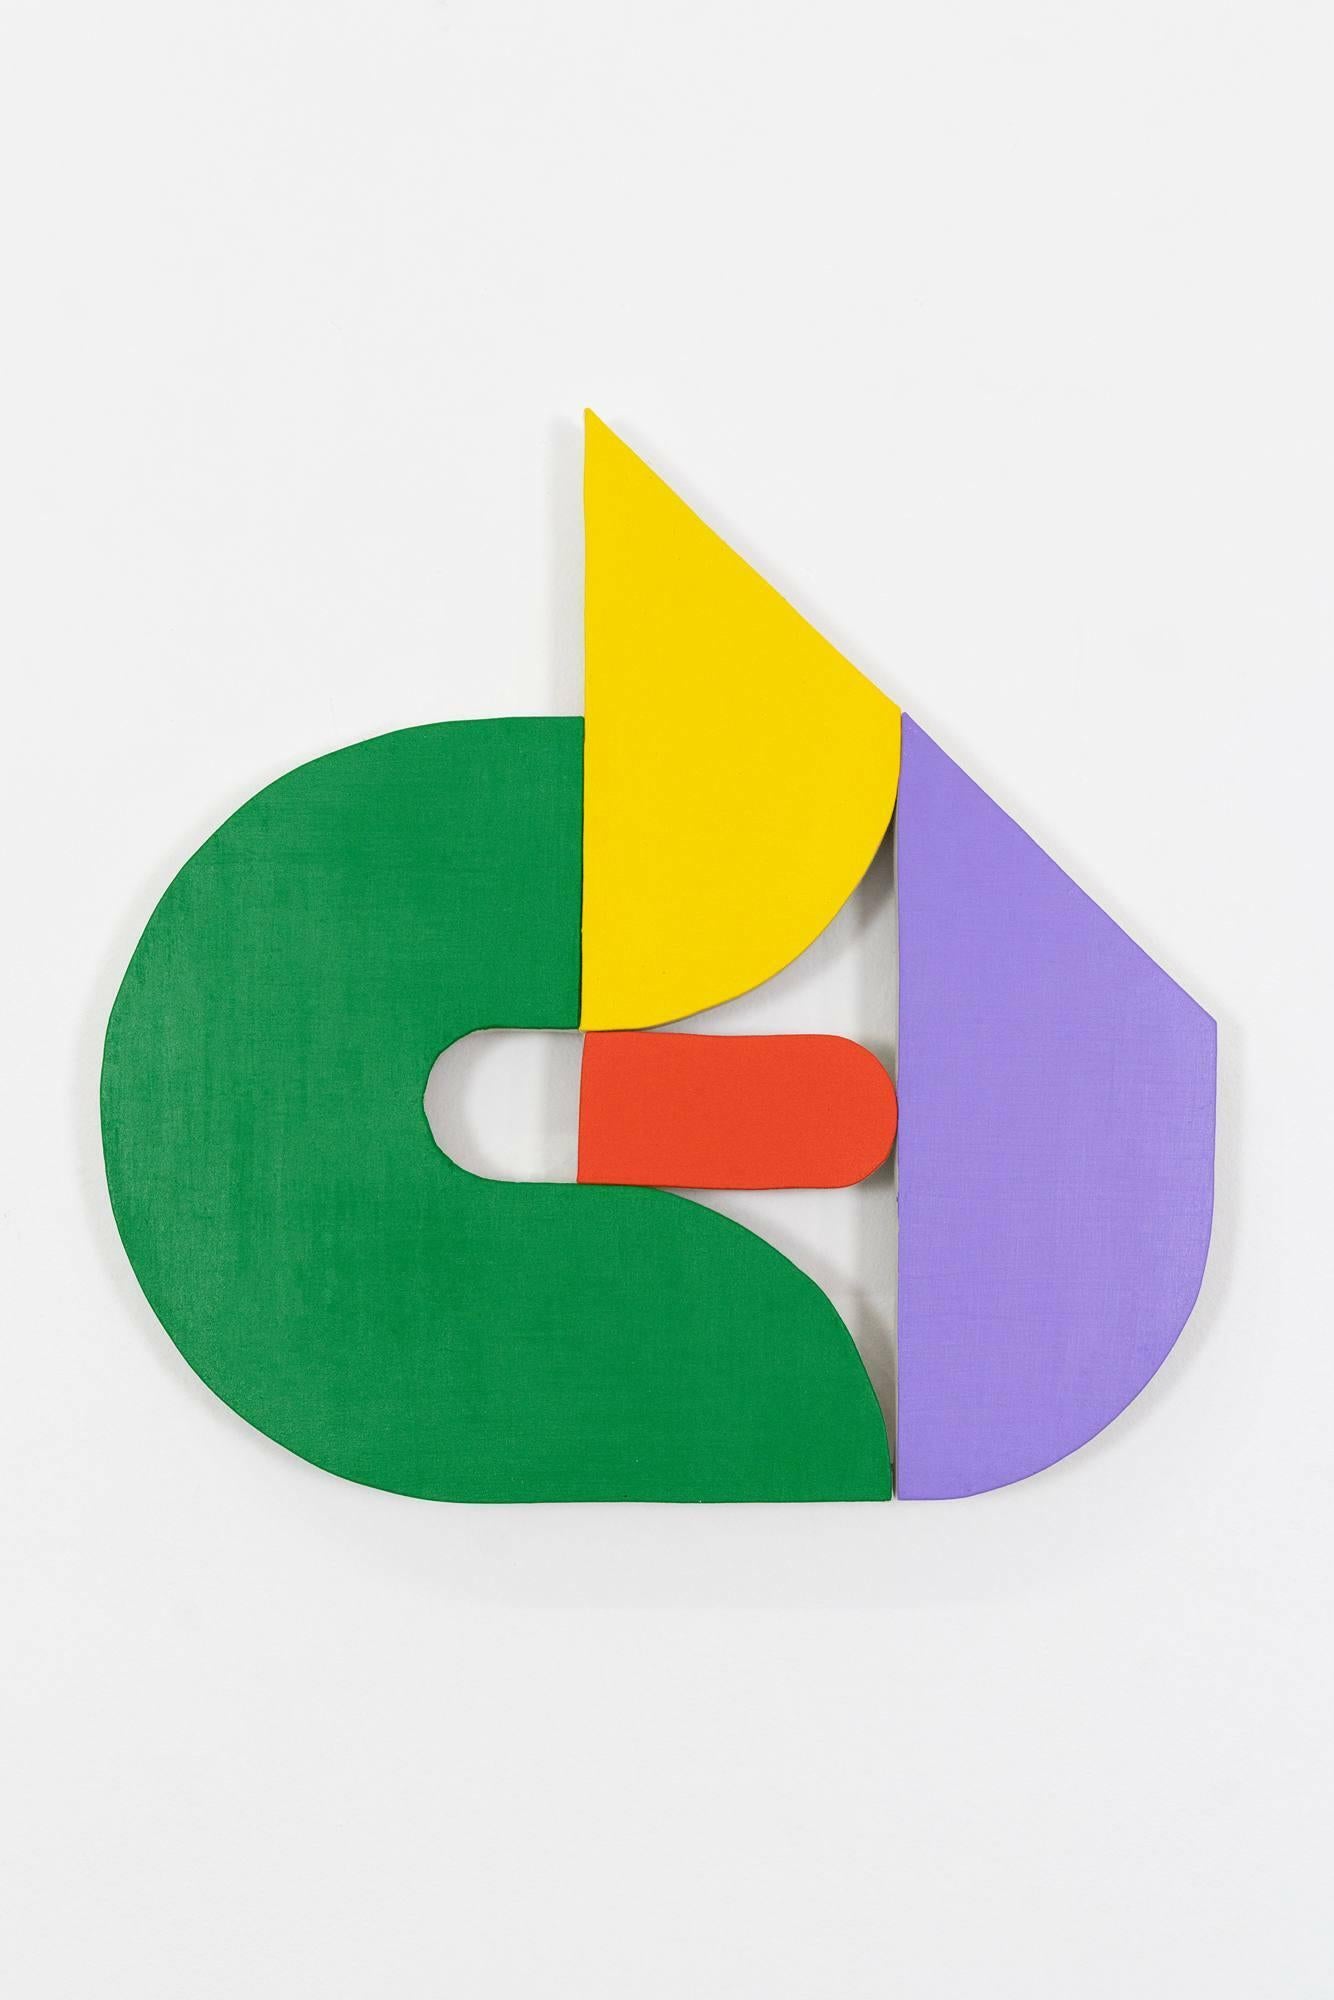 Jason Matherly Abstract Sculpture - "22-13" Mixed Media Wall Sculpture painting-  green, yellow, purple, red